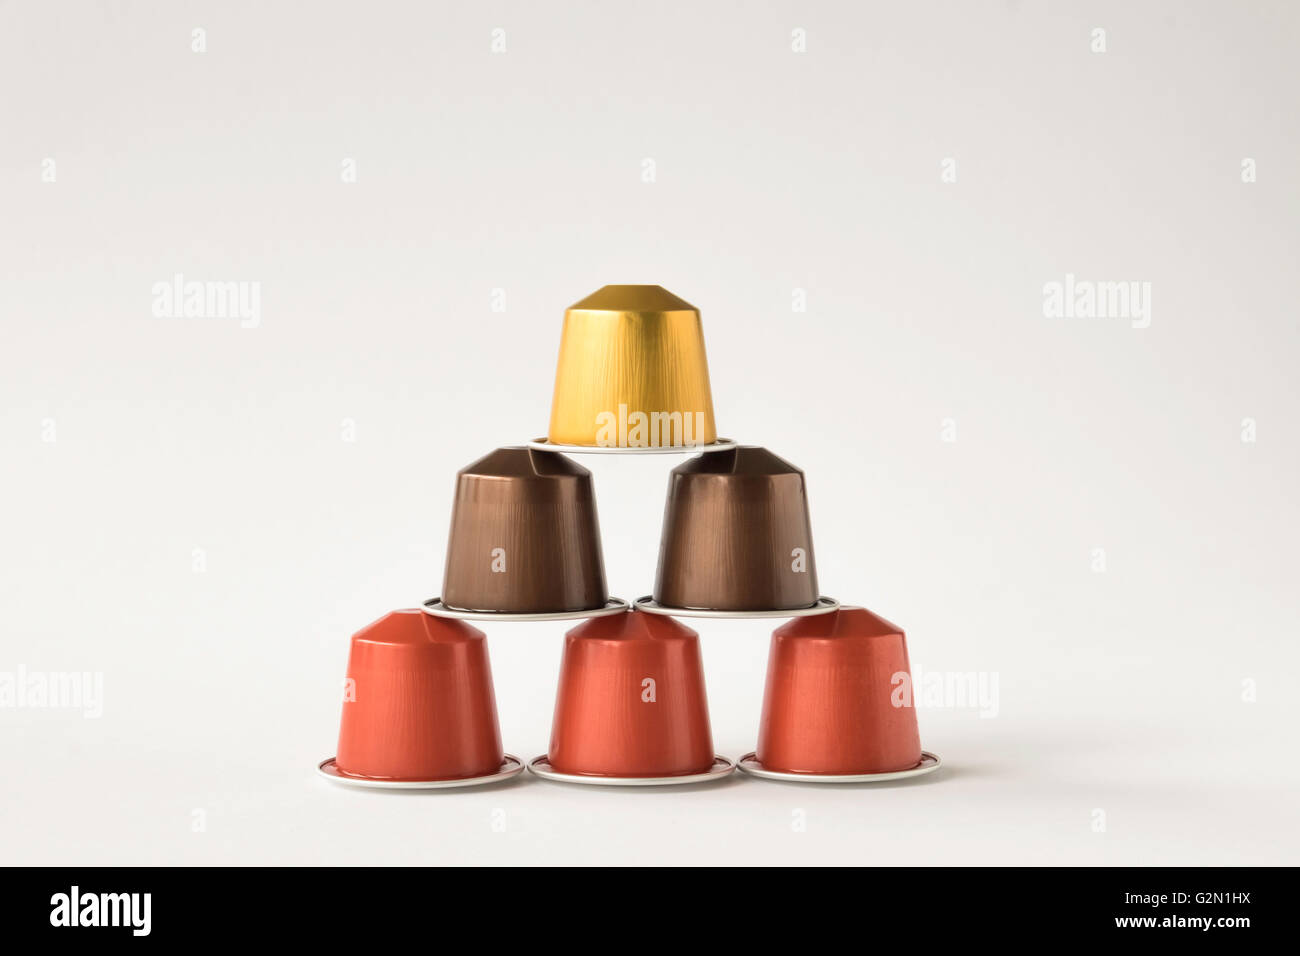 Pyramid of six coffee pods against white background Stock Photo